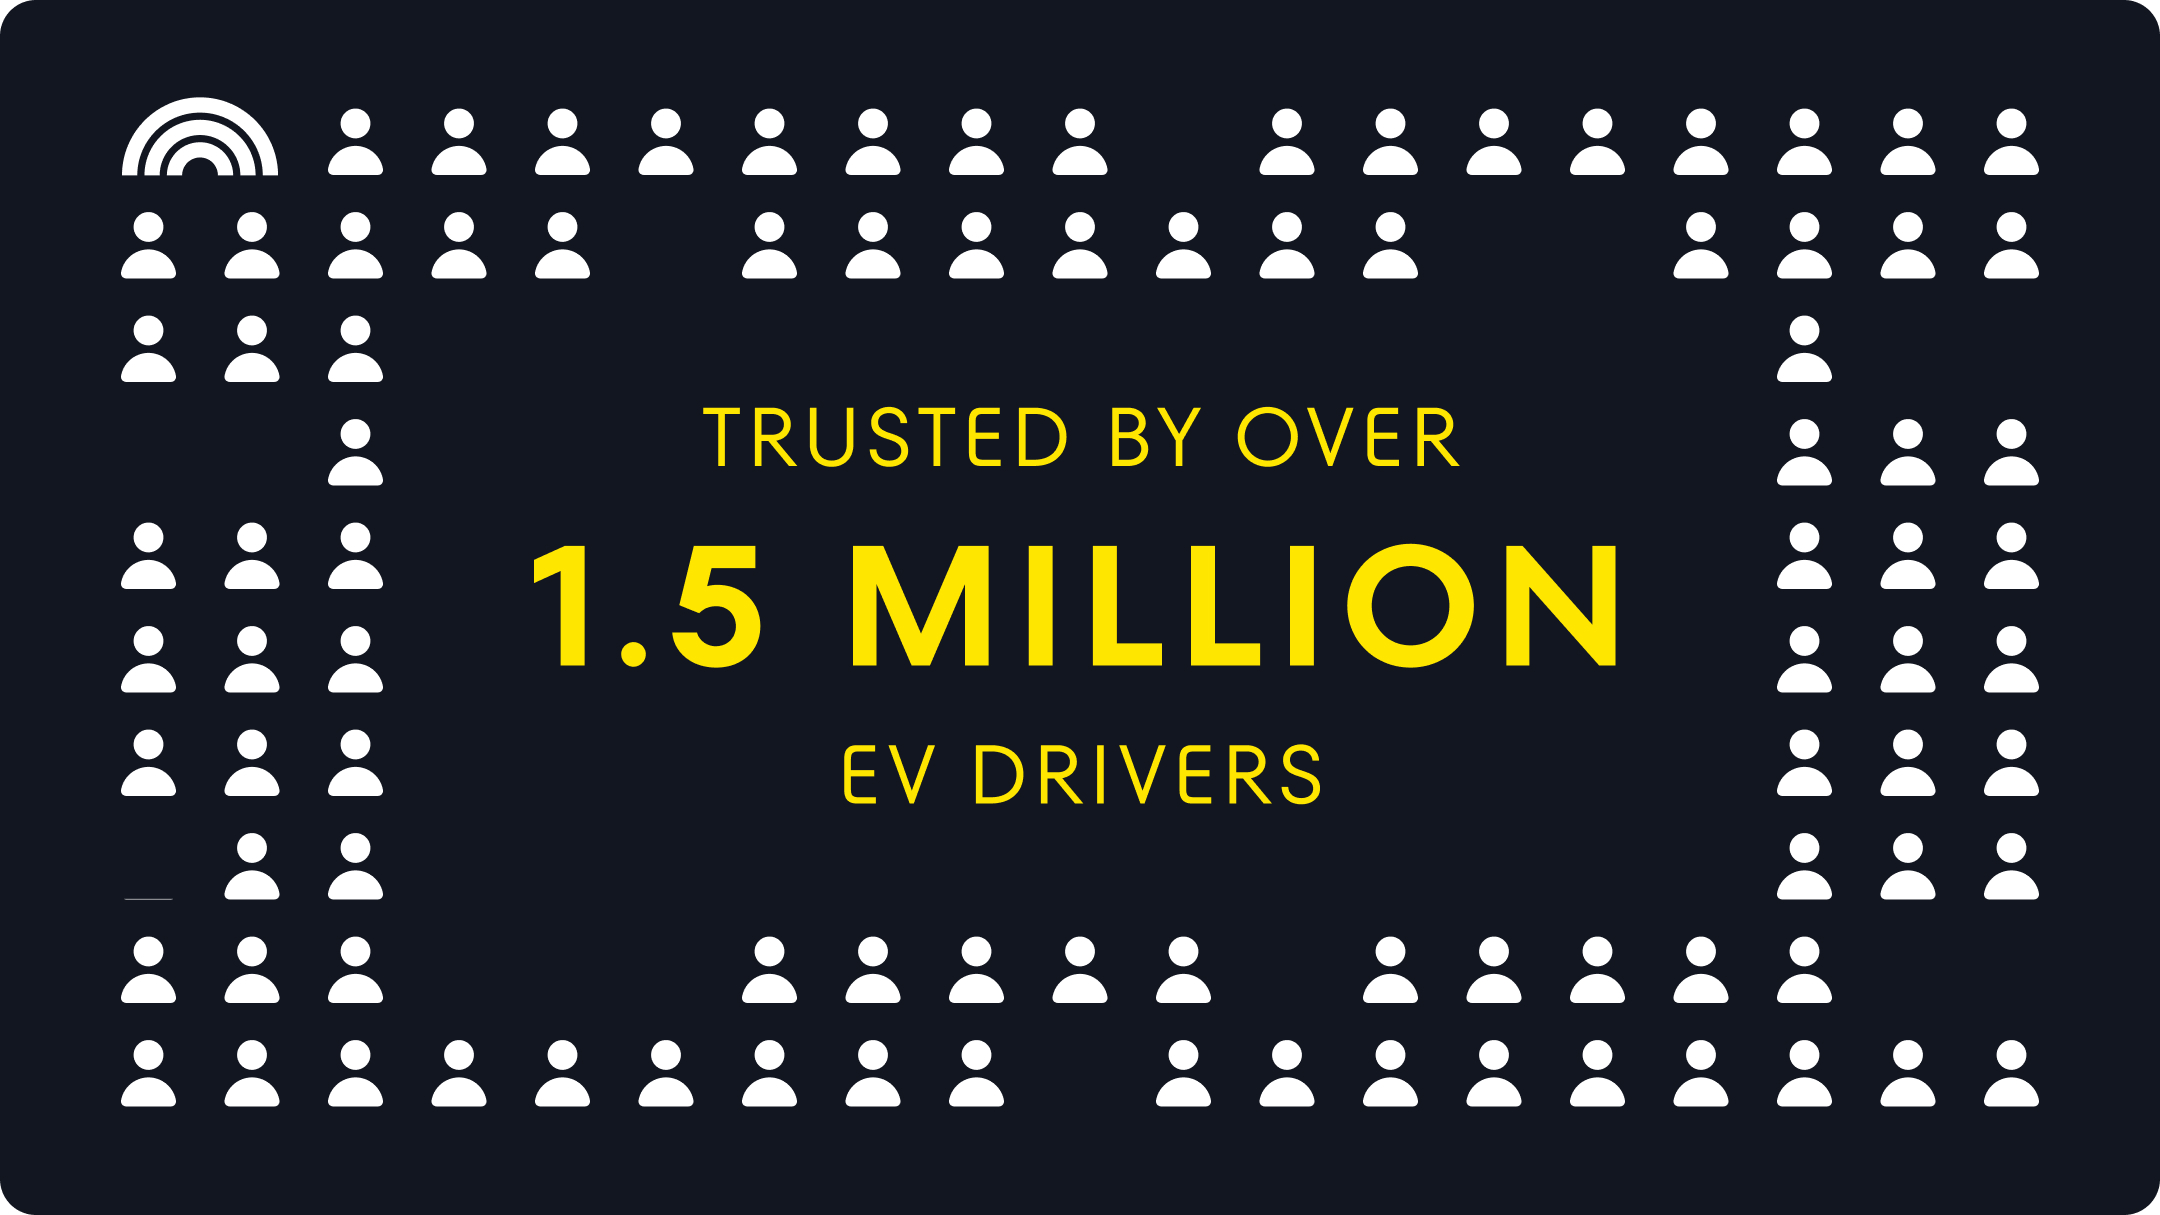 Trusted by over 1.5 million EV drivers